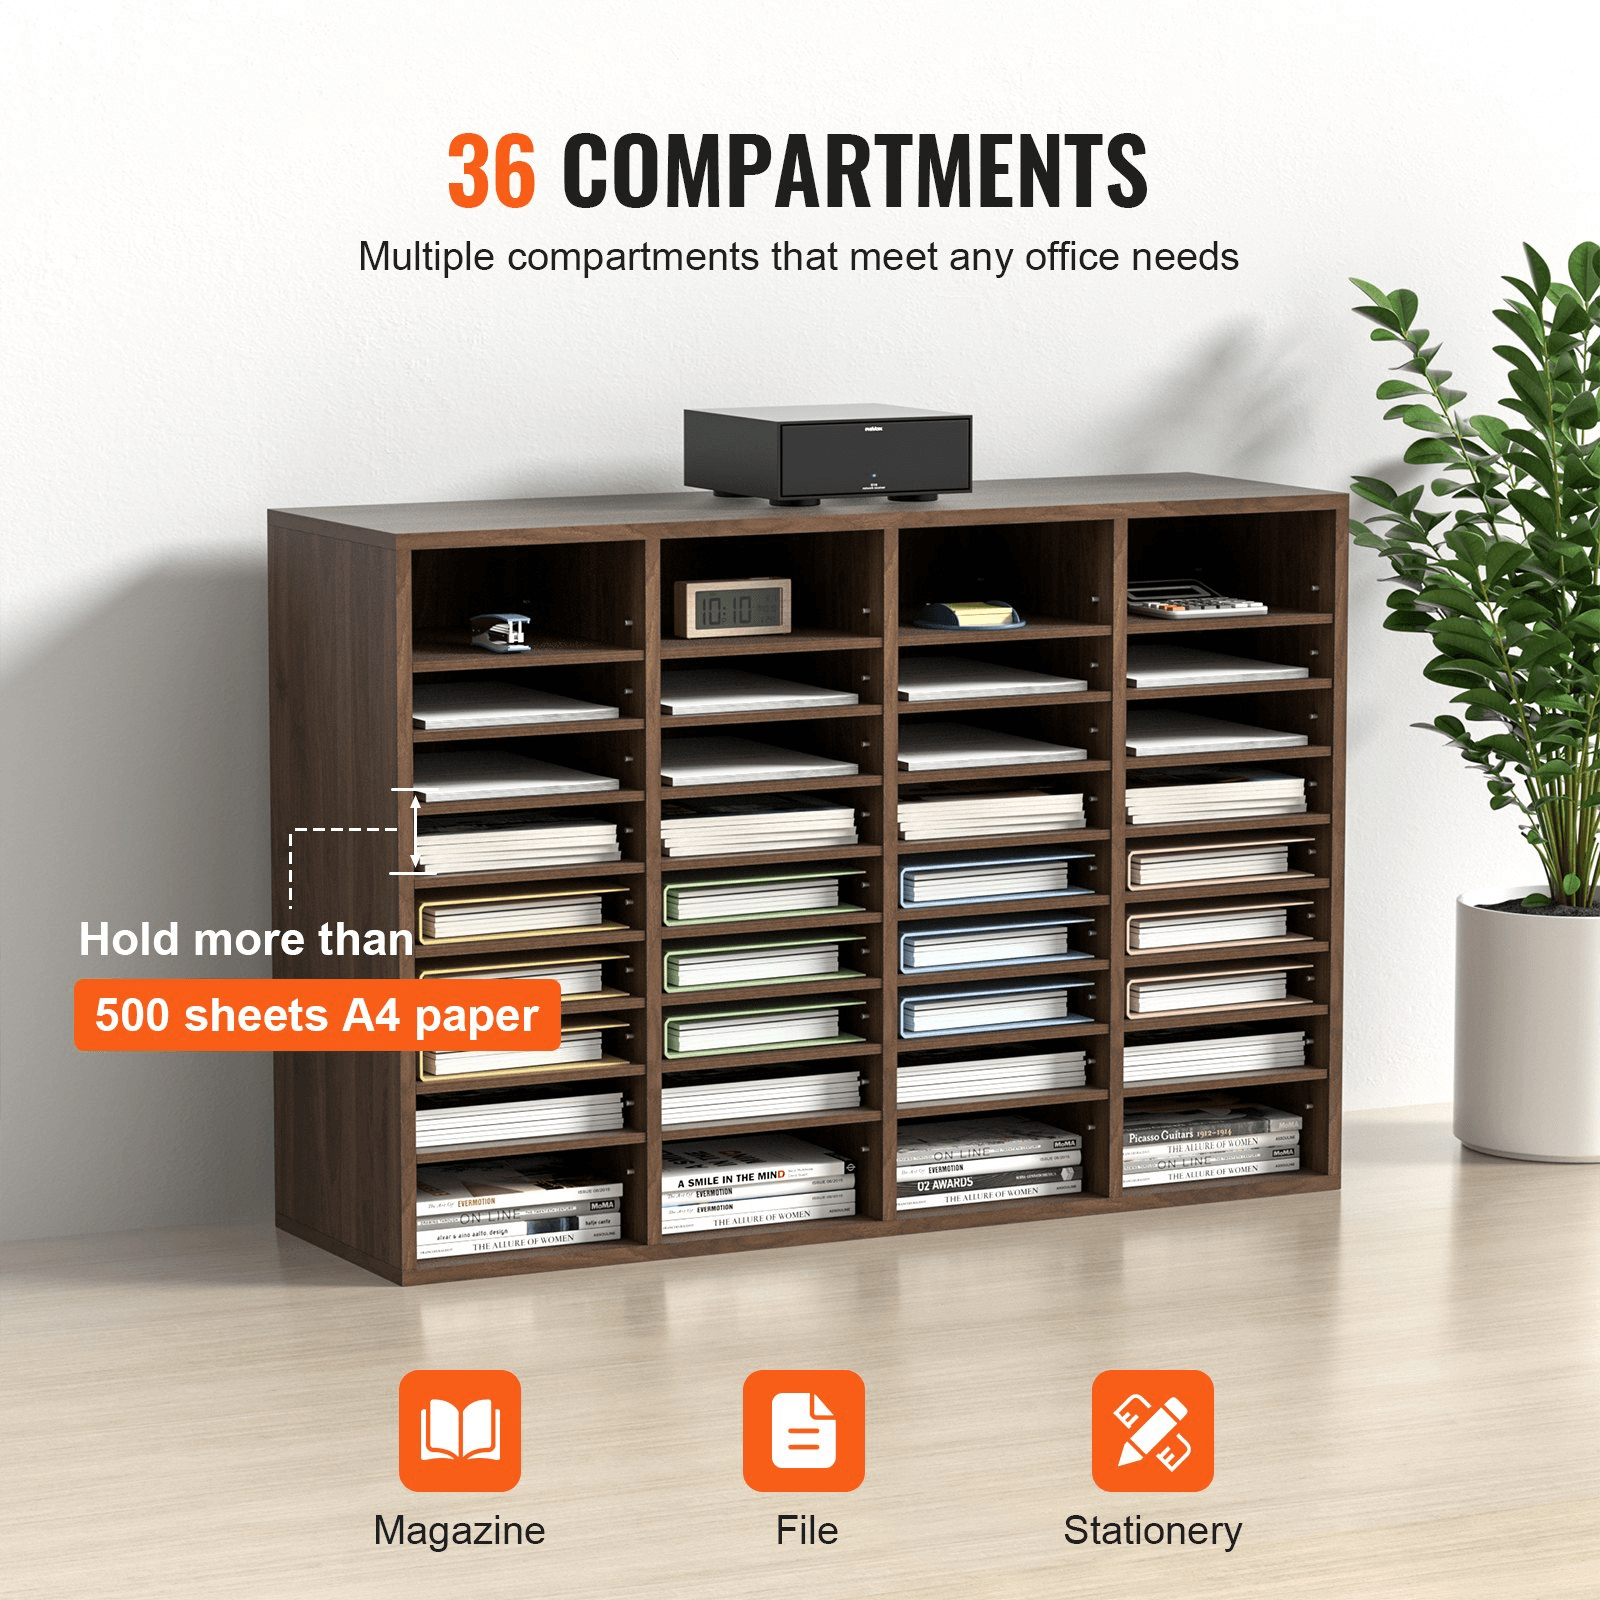 VEVOR Literature Organizers, 36 Compartments Office Mailbox with Adjustable Shelves, Wood Literature Sorter 39.3x12x26.8 inches for Office, Home, Classroom, Mailrooms Organization, EPA Certified Brown - Loomini